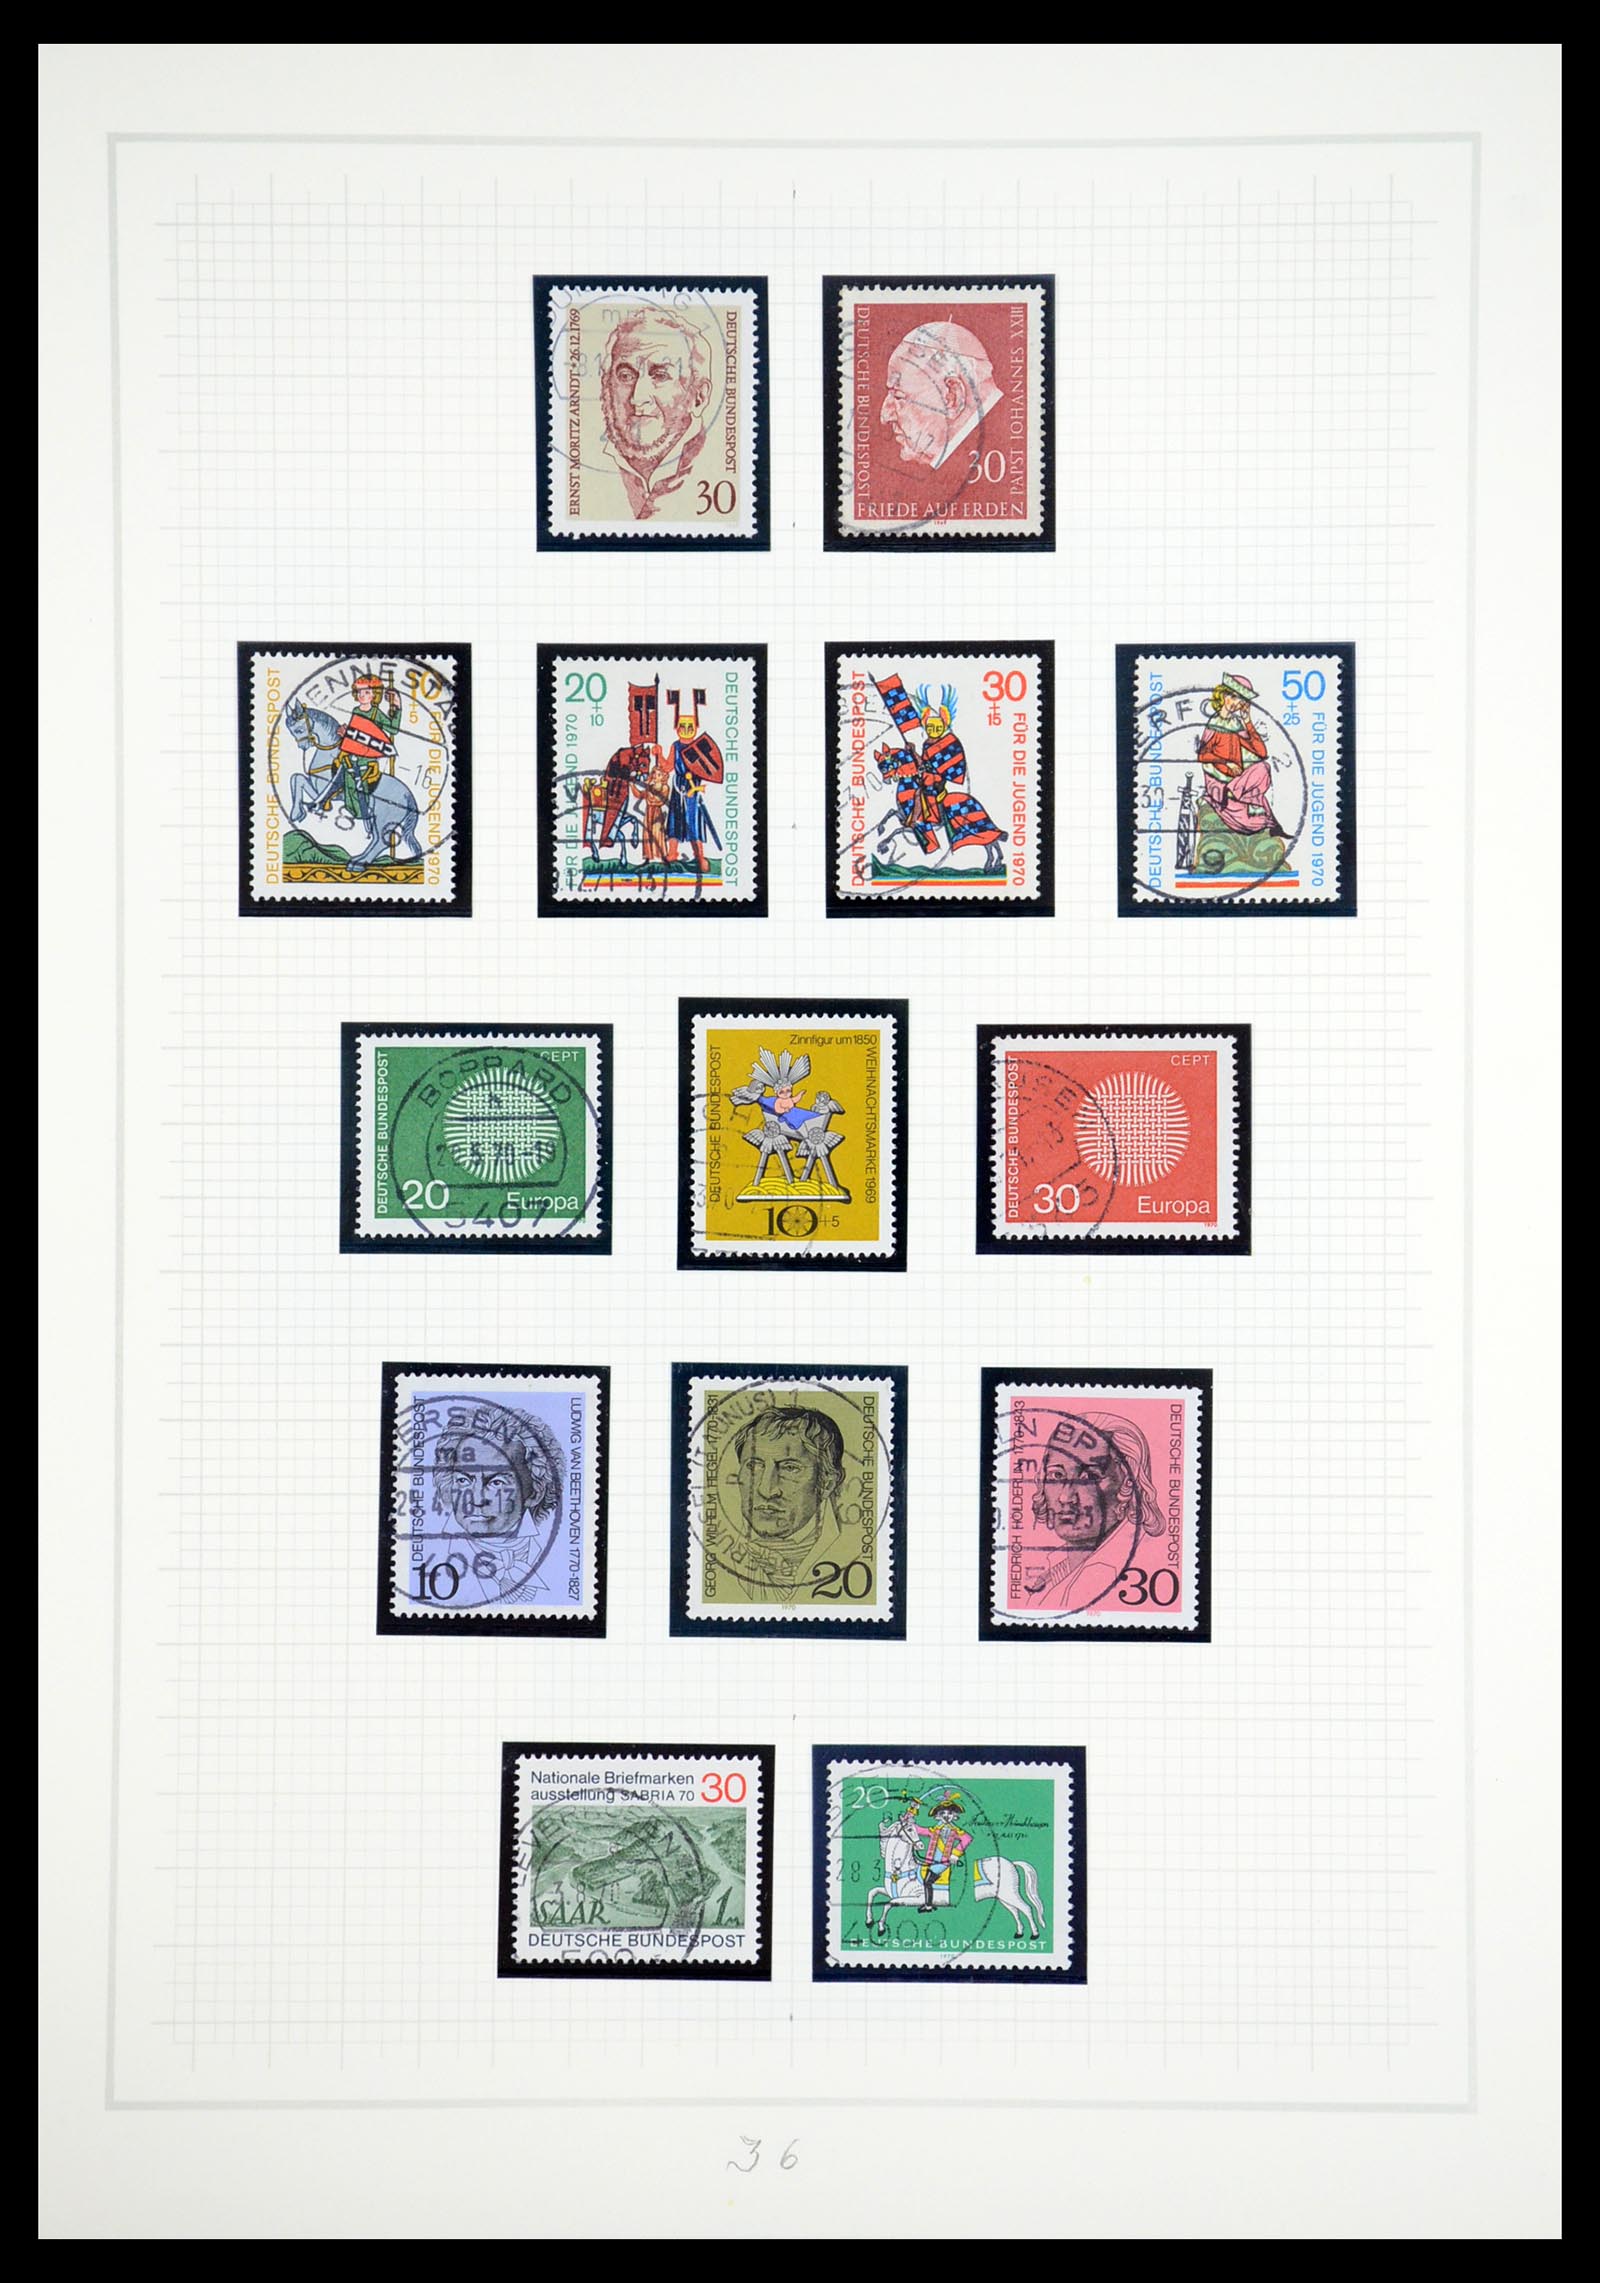 36537 036 - Stamp collection 36537 Bundespost 1949-2012.